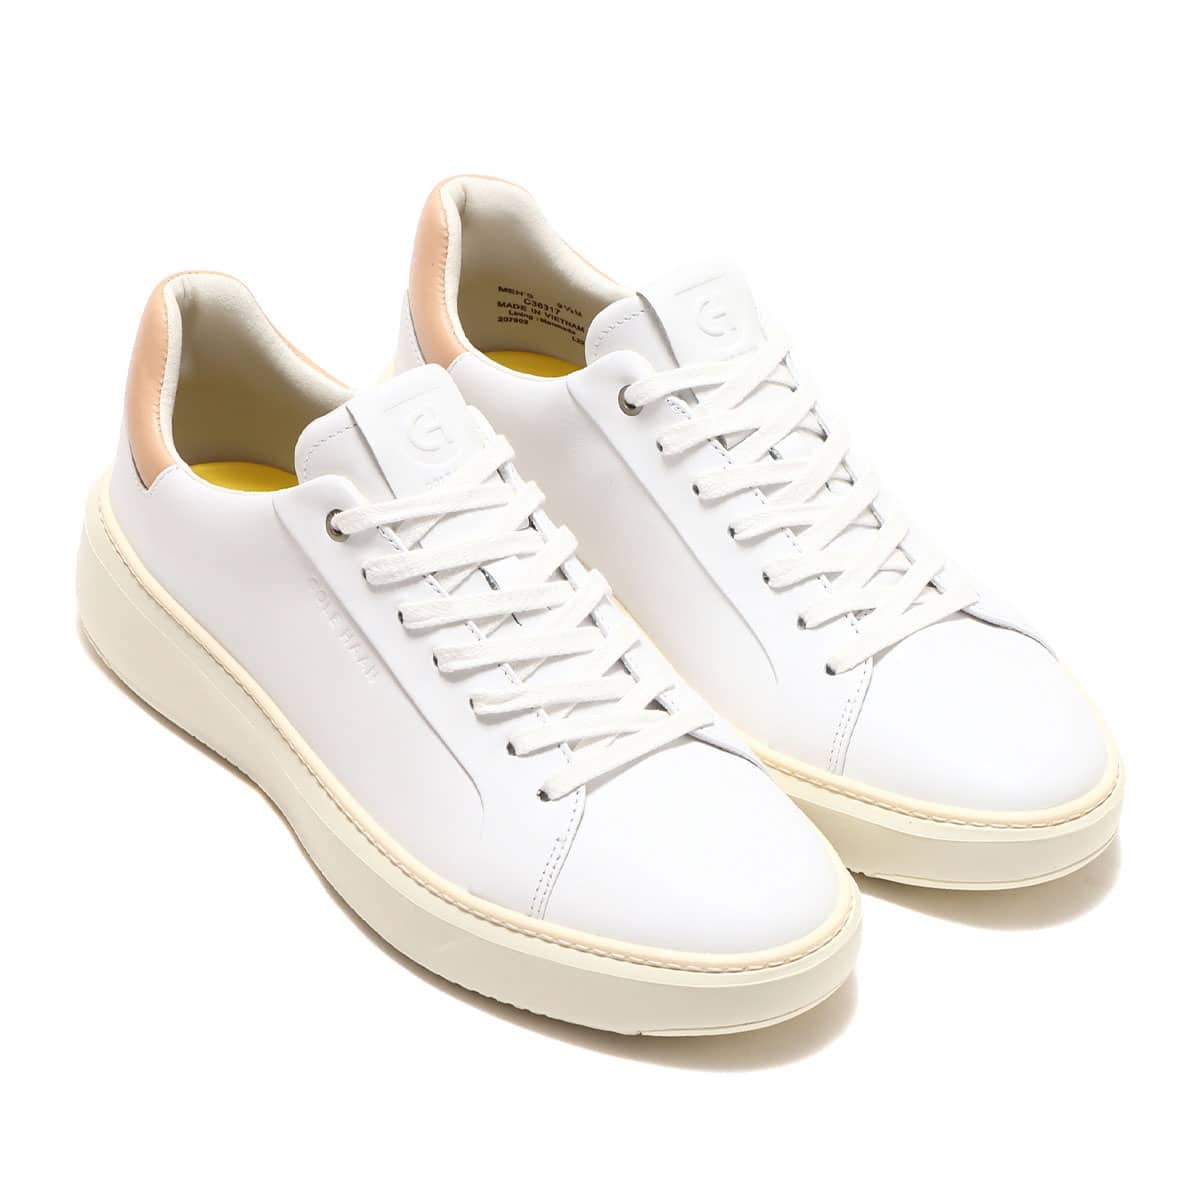 COLE HAAN GRANDPRO TOPSPIN SNEAKER OPTIC WHITE/CH BRITISH TAN